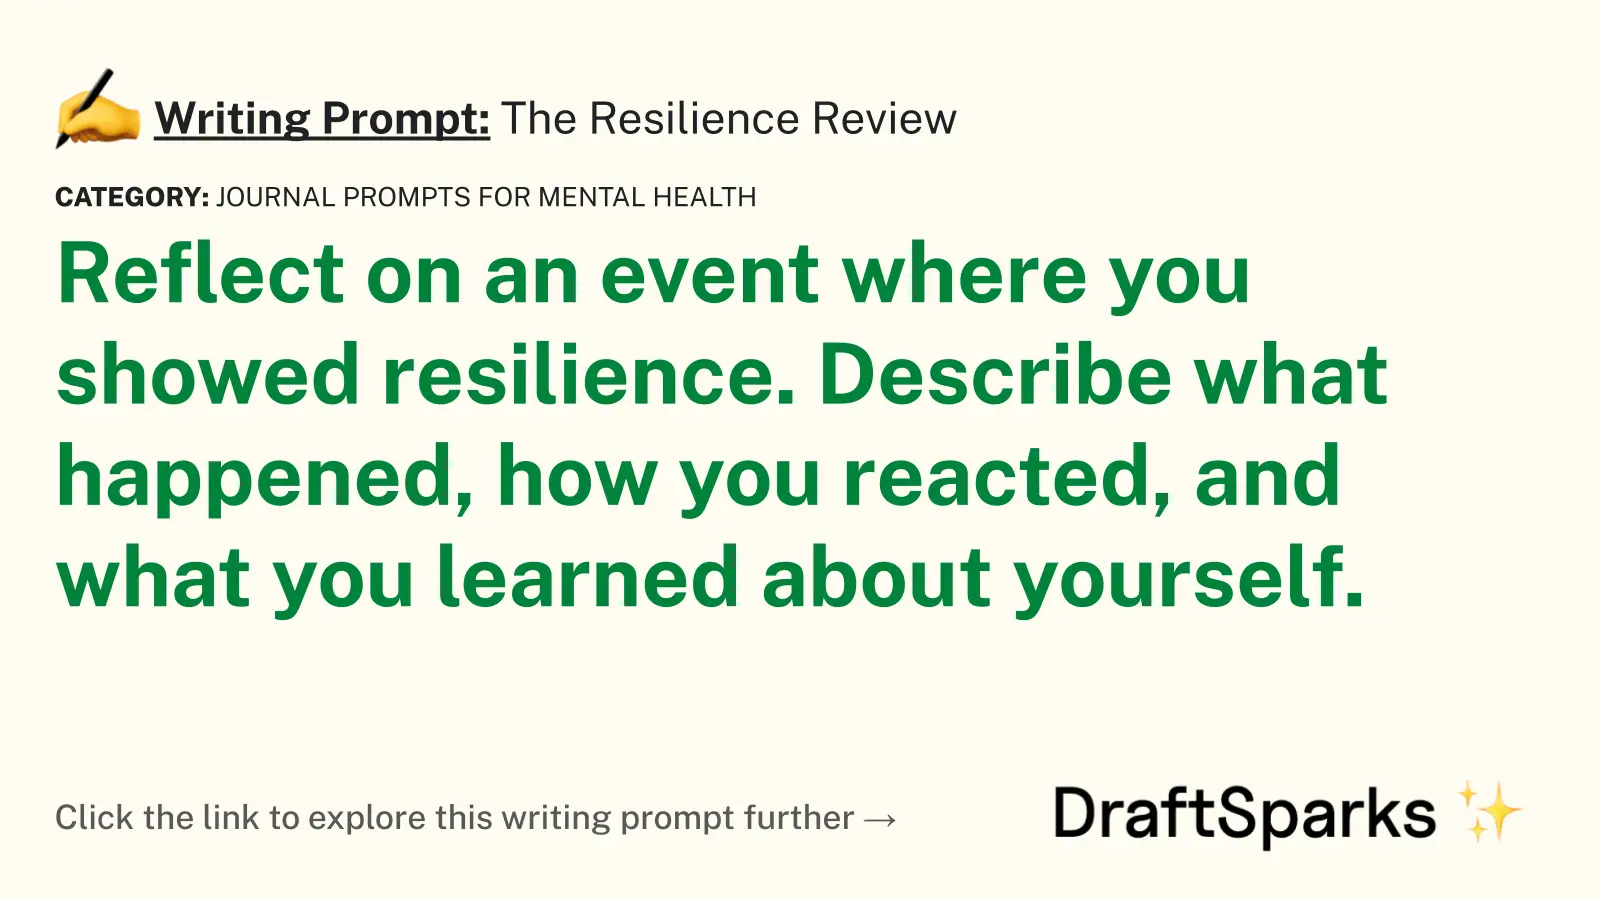 The Resilience Review